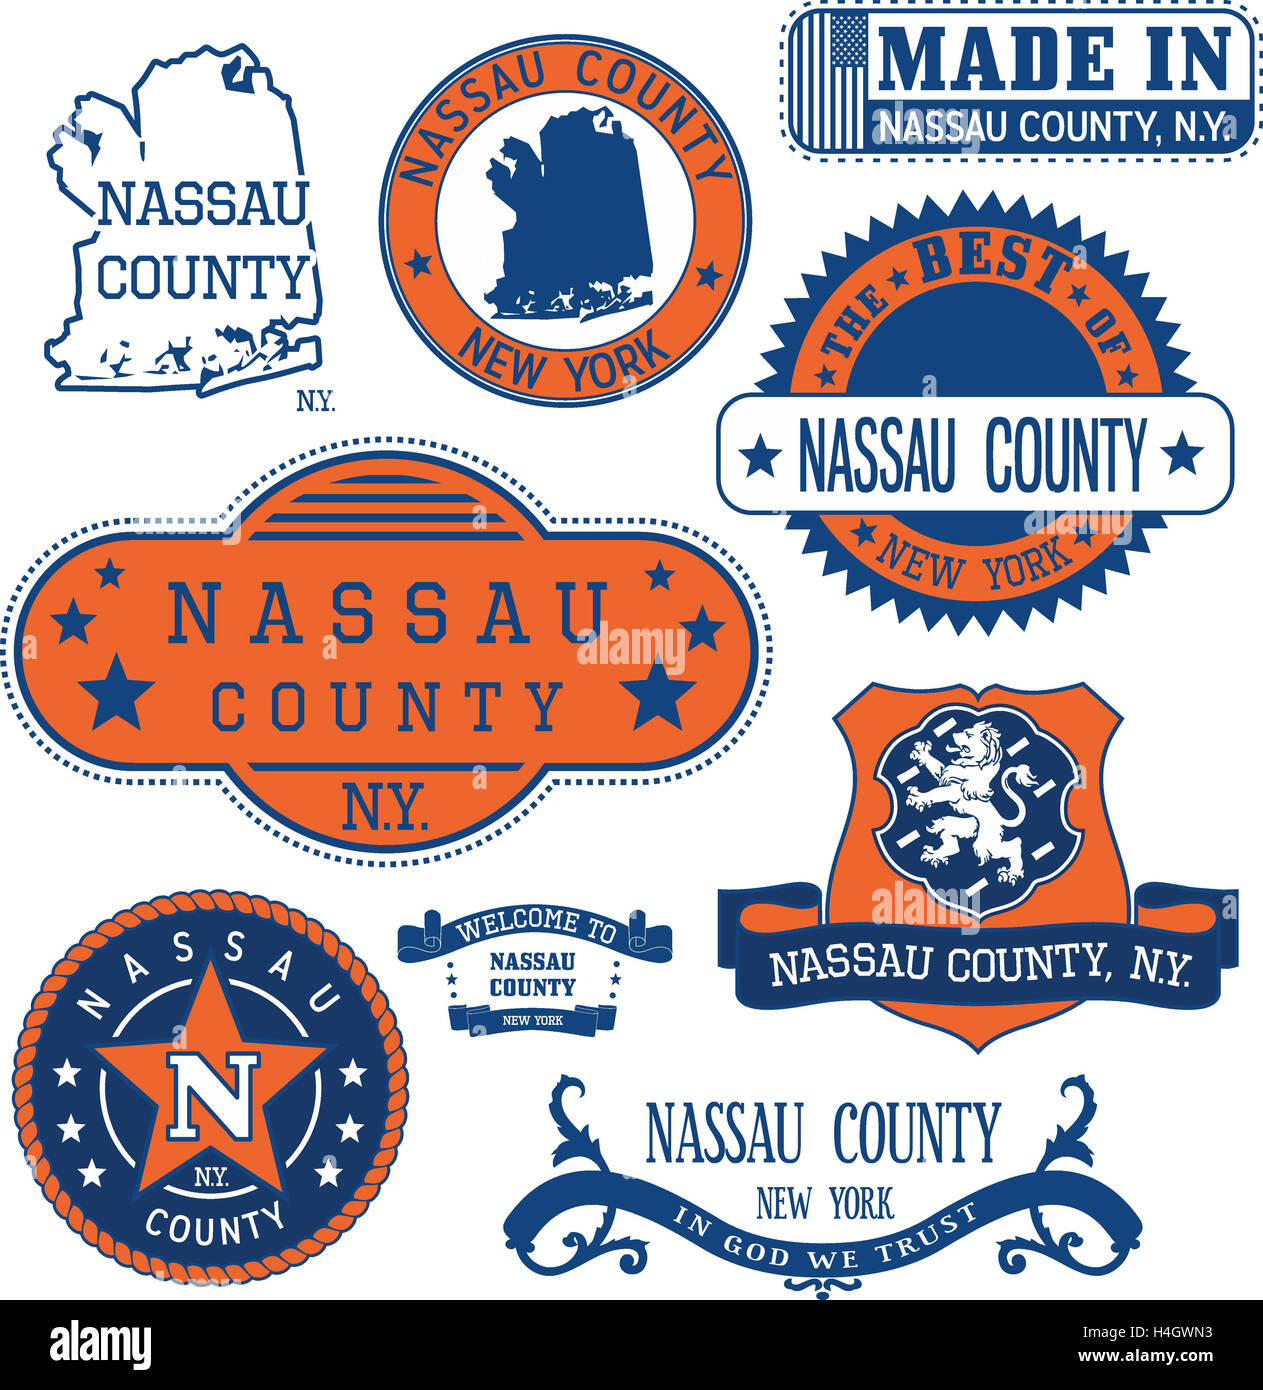 Nassau county, New York. Set of generic stamps and signs including Nassau county map and seal elements. Stock Photo